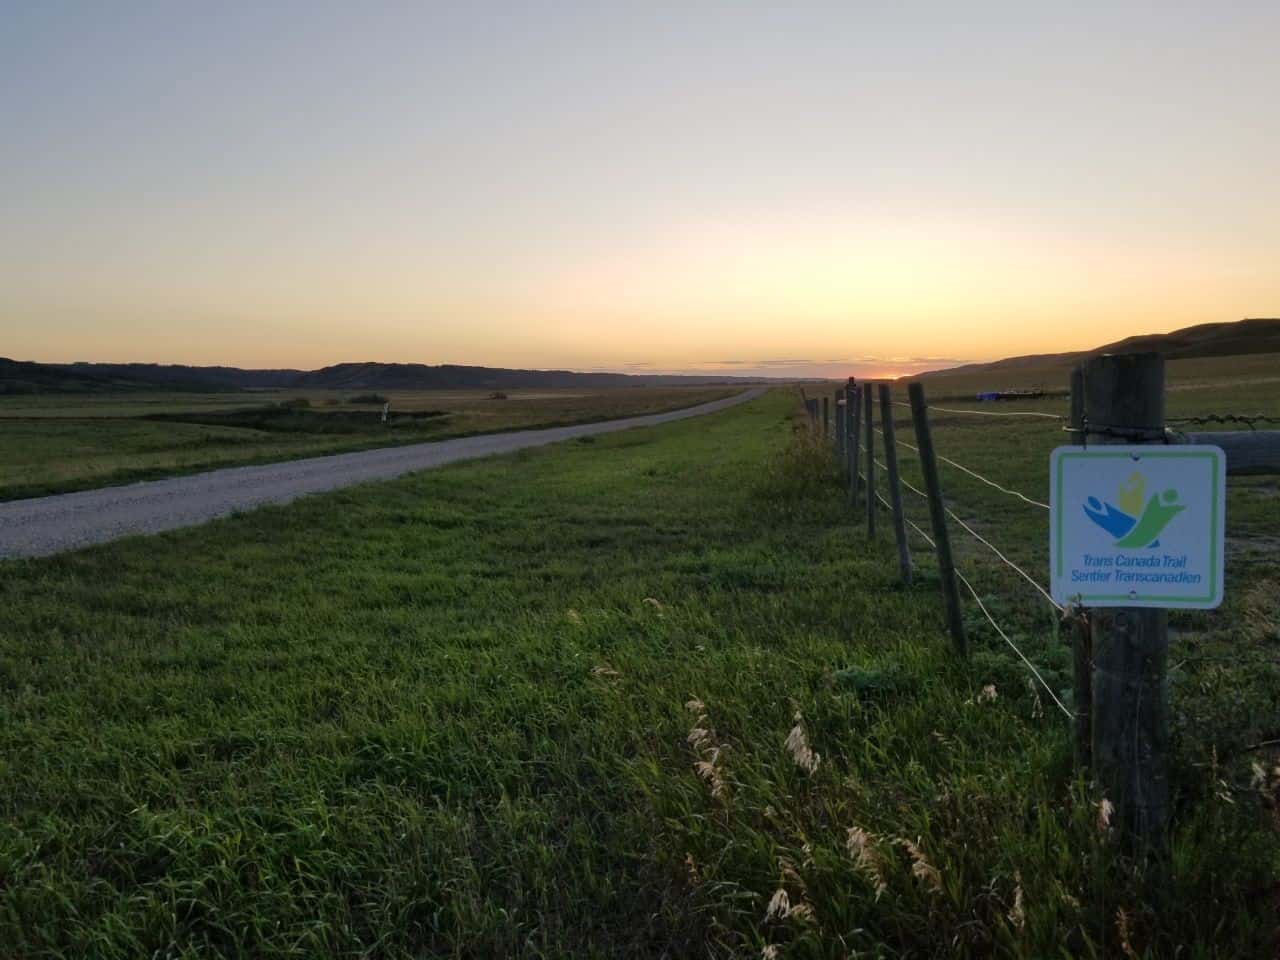 The Trans Canada Trail in Saskatchewan includes over 1,450 km of hiking and cycing trails and waterways, providing a unique way to experience the prairies.